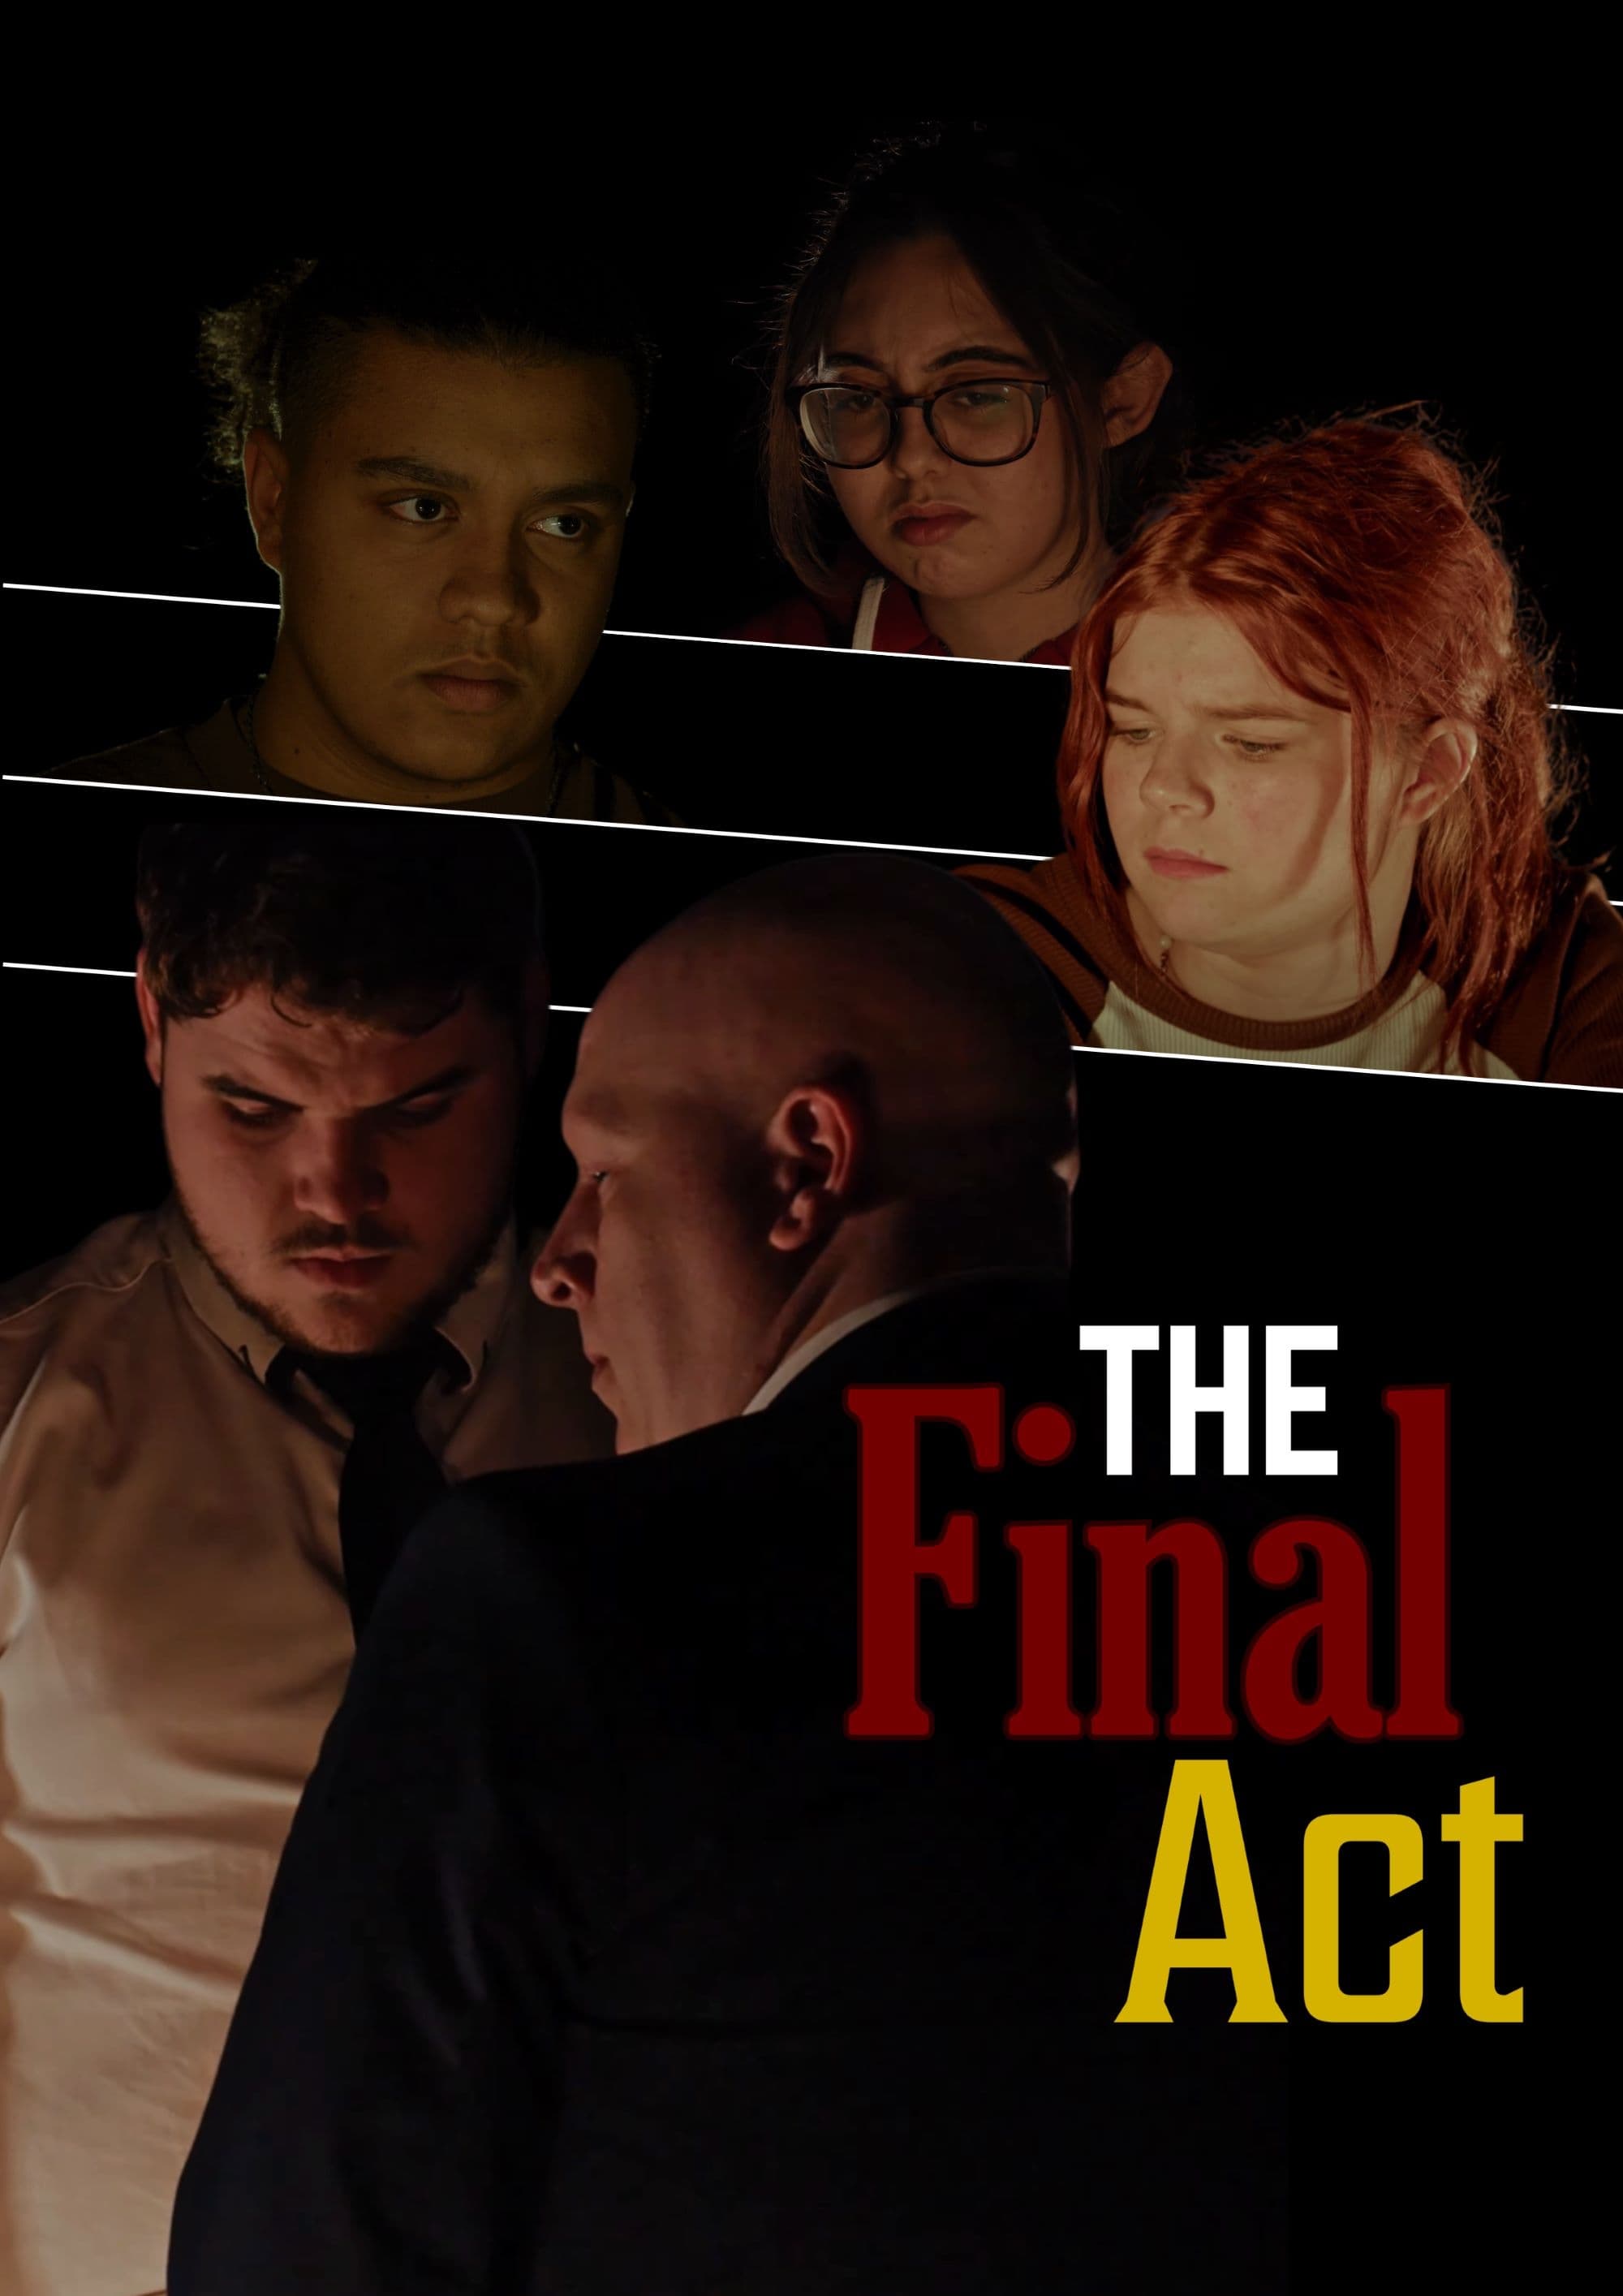 The Final Act